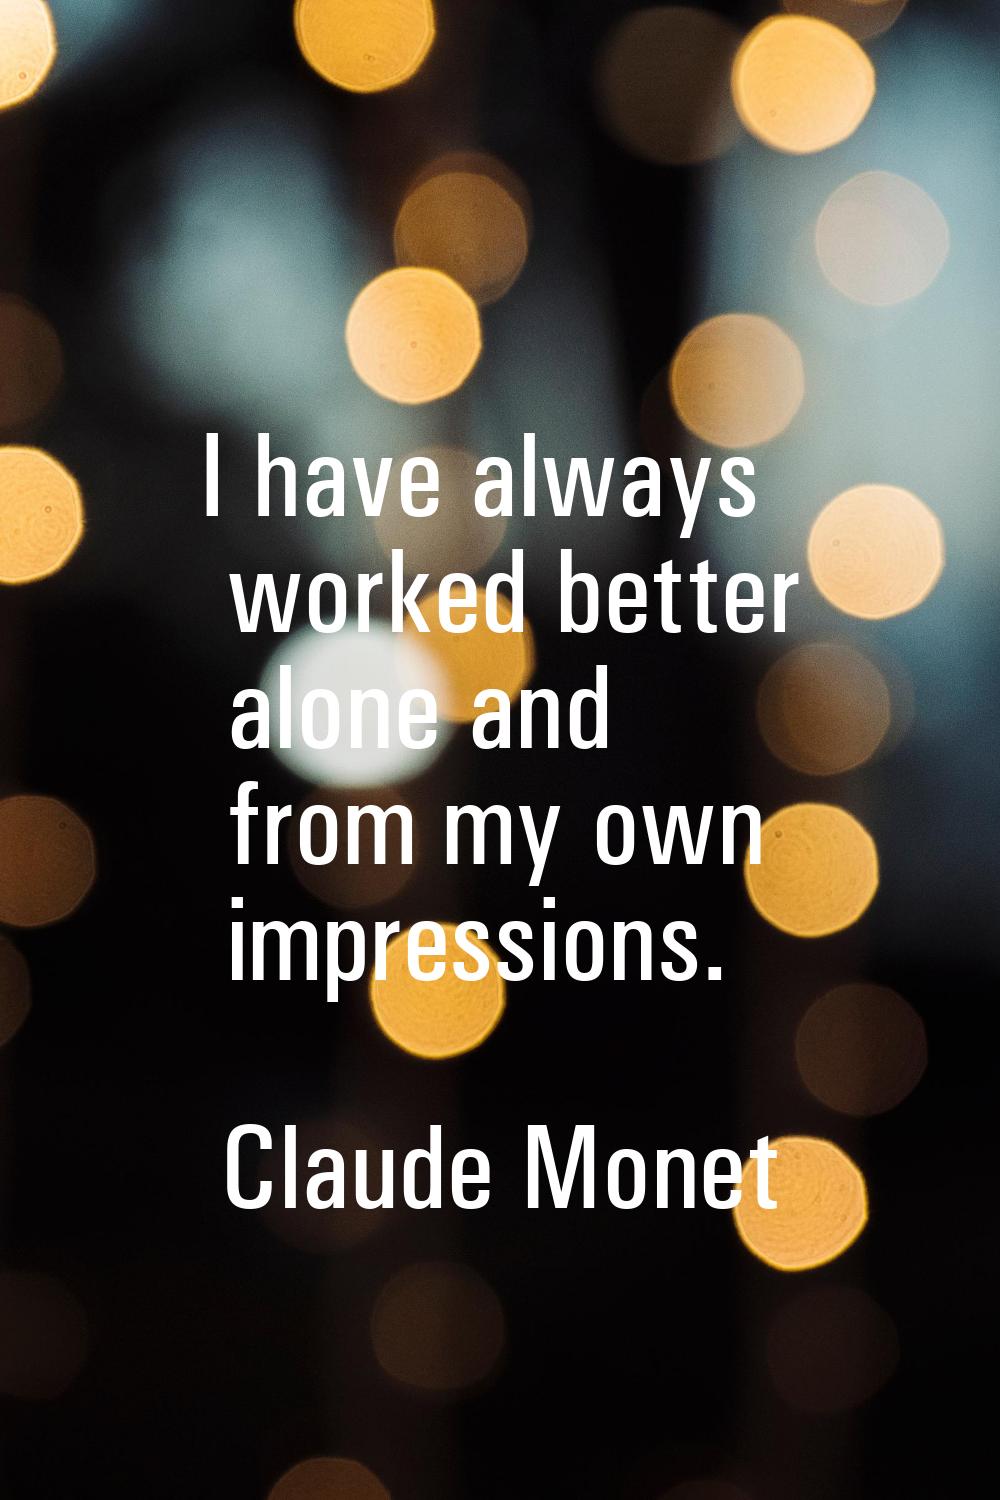 I have always worked better alone and from my own impressions.